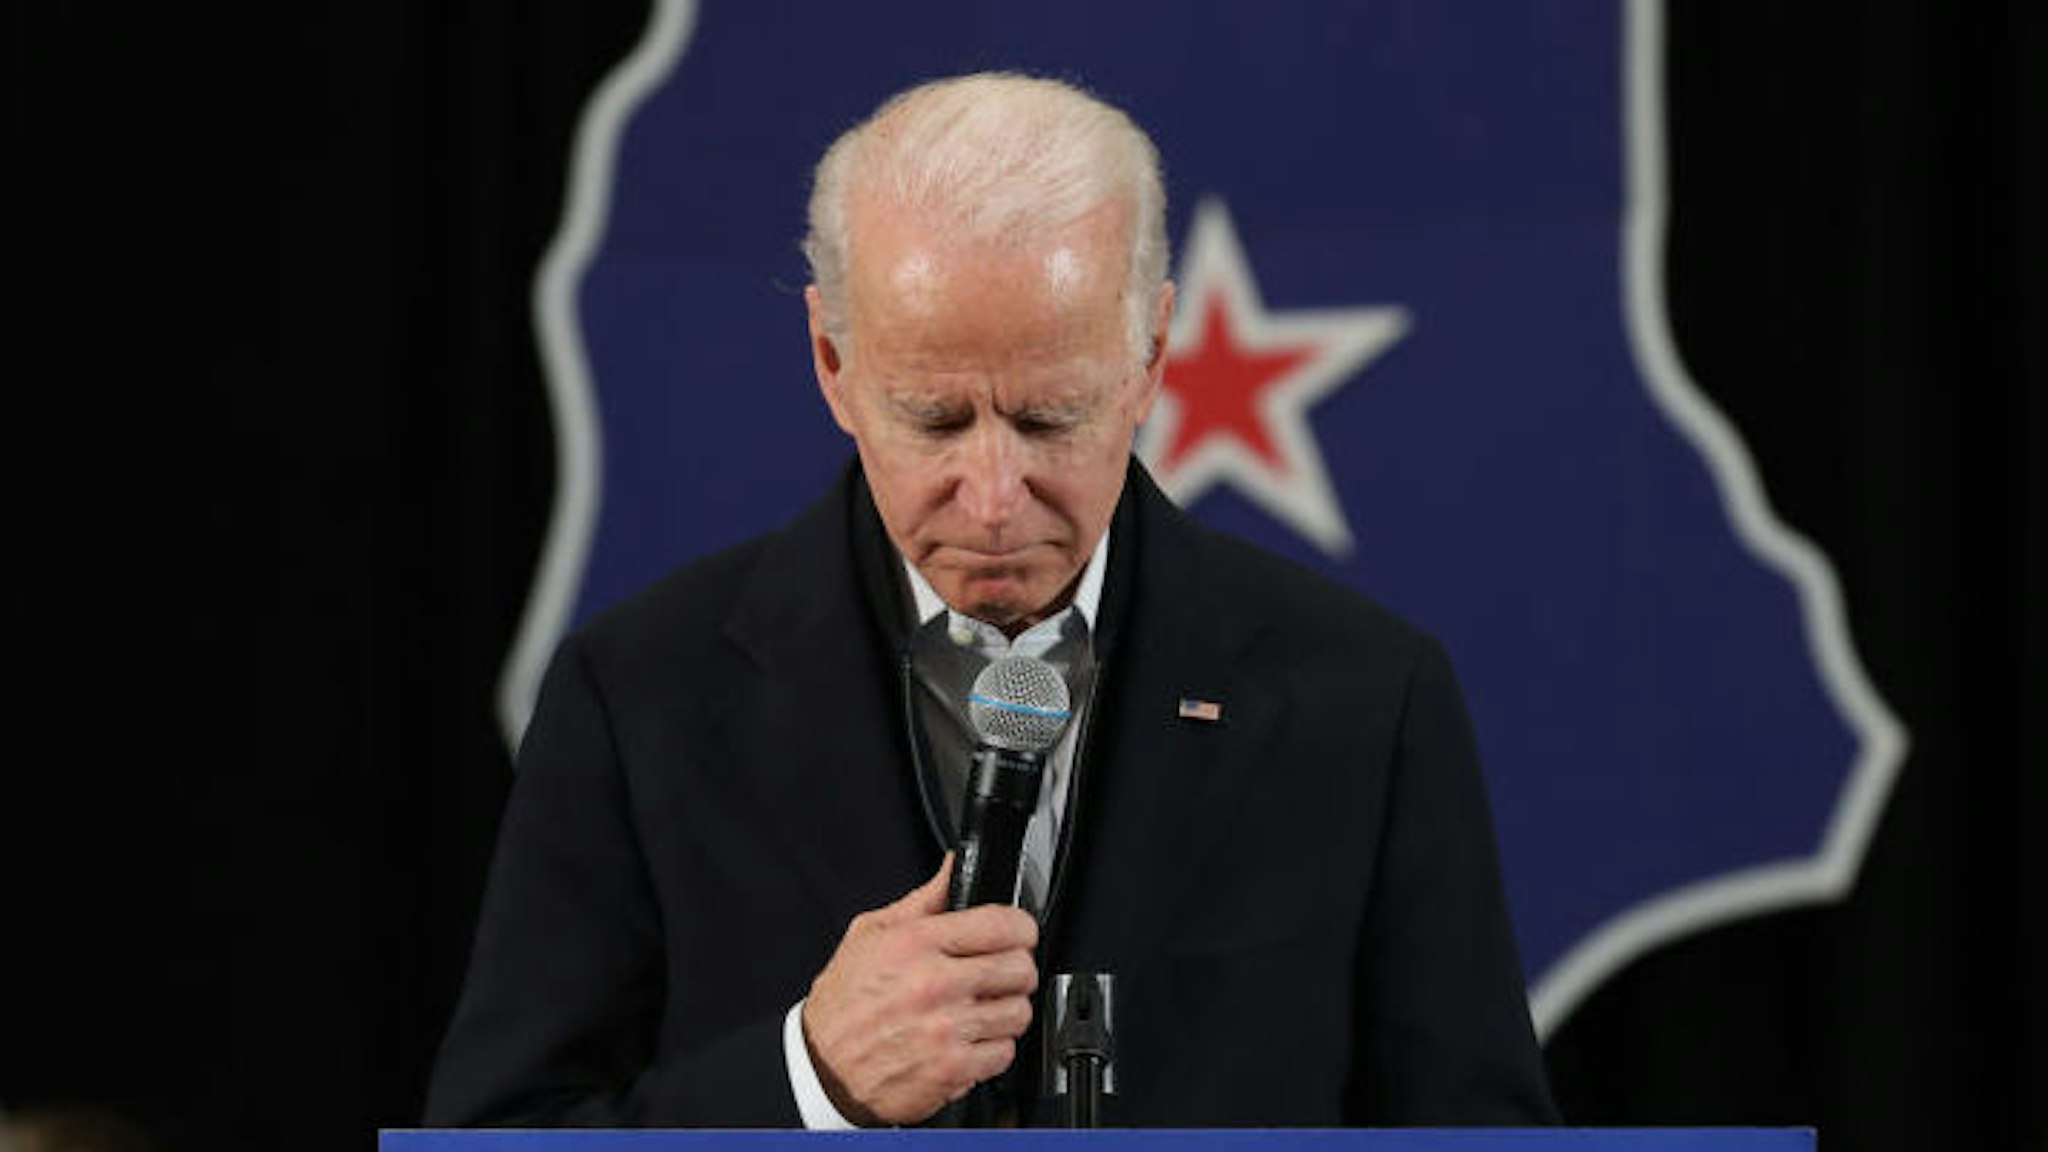 Democratic presidential candidate former Vice President Joe Biden speaks during a campaign event on February 04, 2020 in Concord, New Hampshire. A day after the Iowa caucuses Joe Biden is campaigning in New Hampshire ahead of the state's primary on February 11. (Photo by Justin Sullivan/Getty Images)